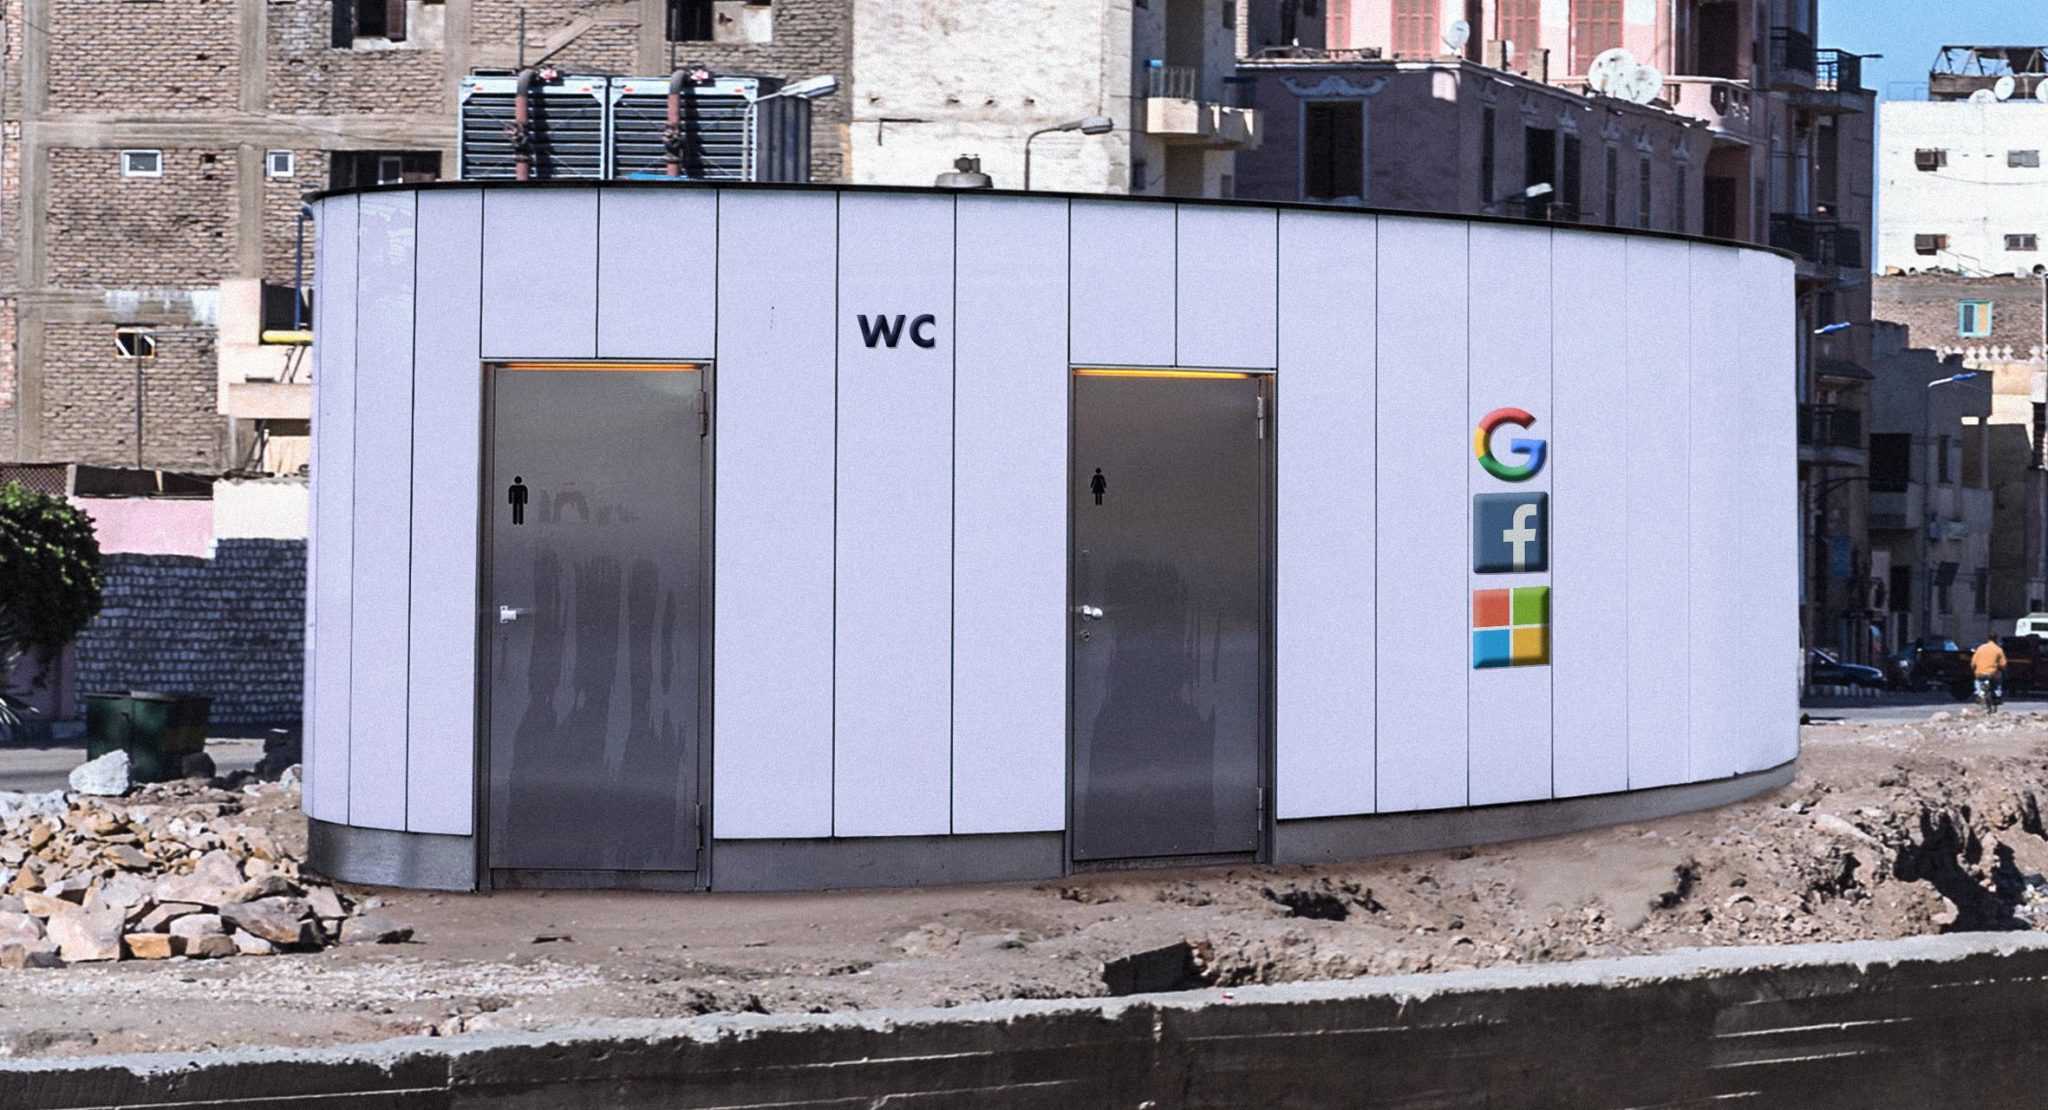 Tech giants sponsor public toilets in developing countries in lieu of tax money image